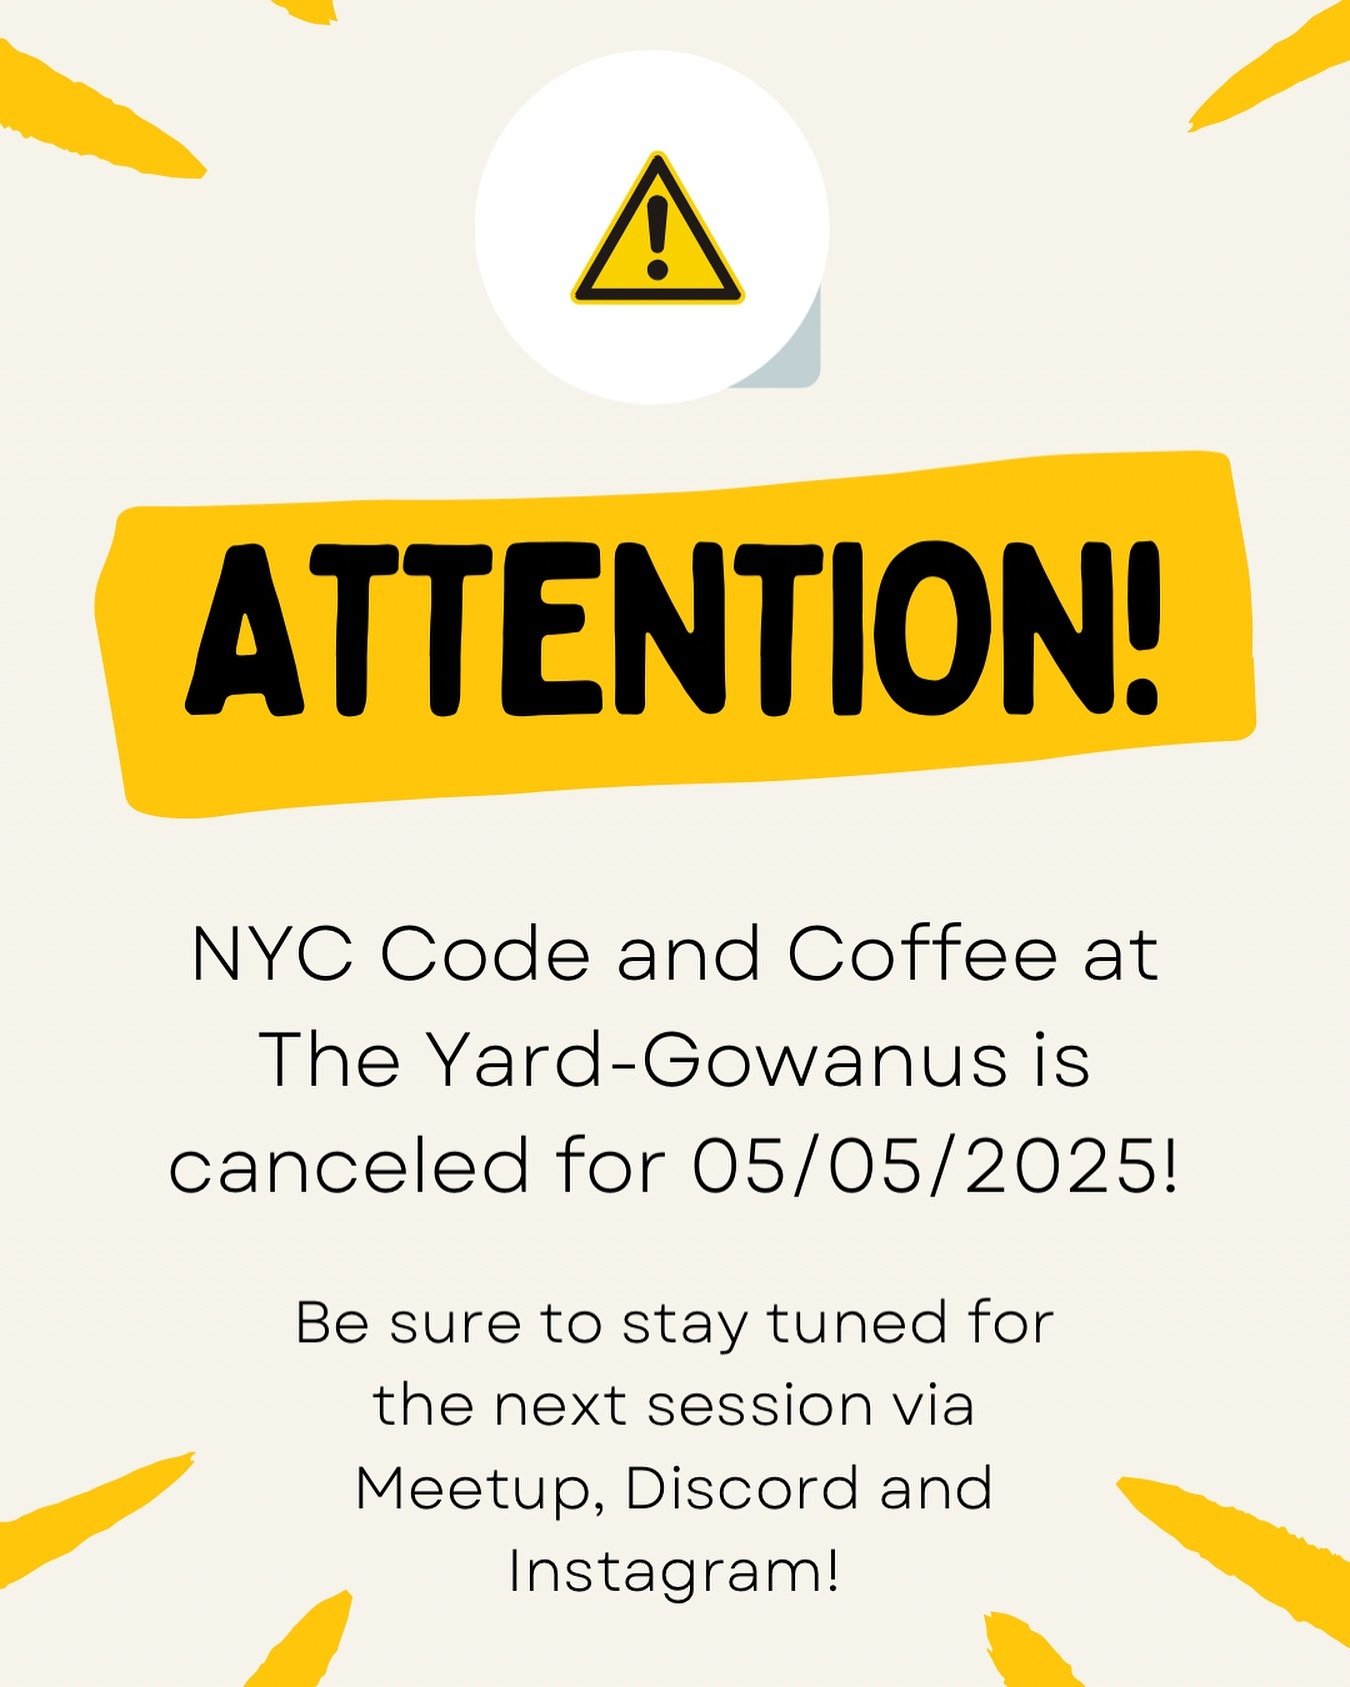 If you were signed up on Meetup.com, you were not confused. We canceled our Session at The Yard for Sunday May 5th. Tune into the Discord for more updates on the next session. 

- Your NYC Code and Coffee Team